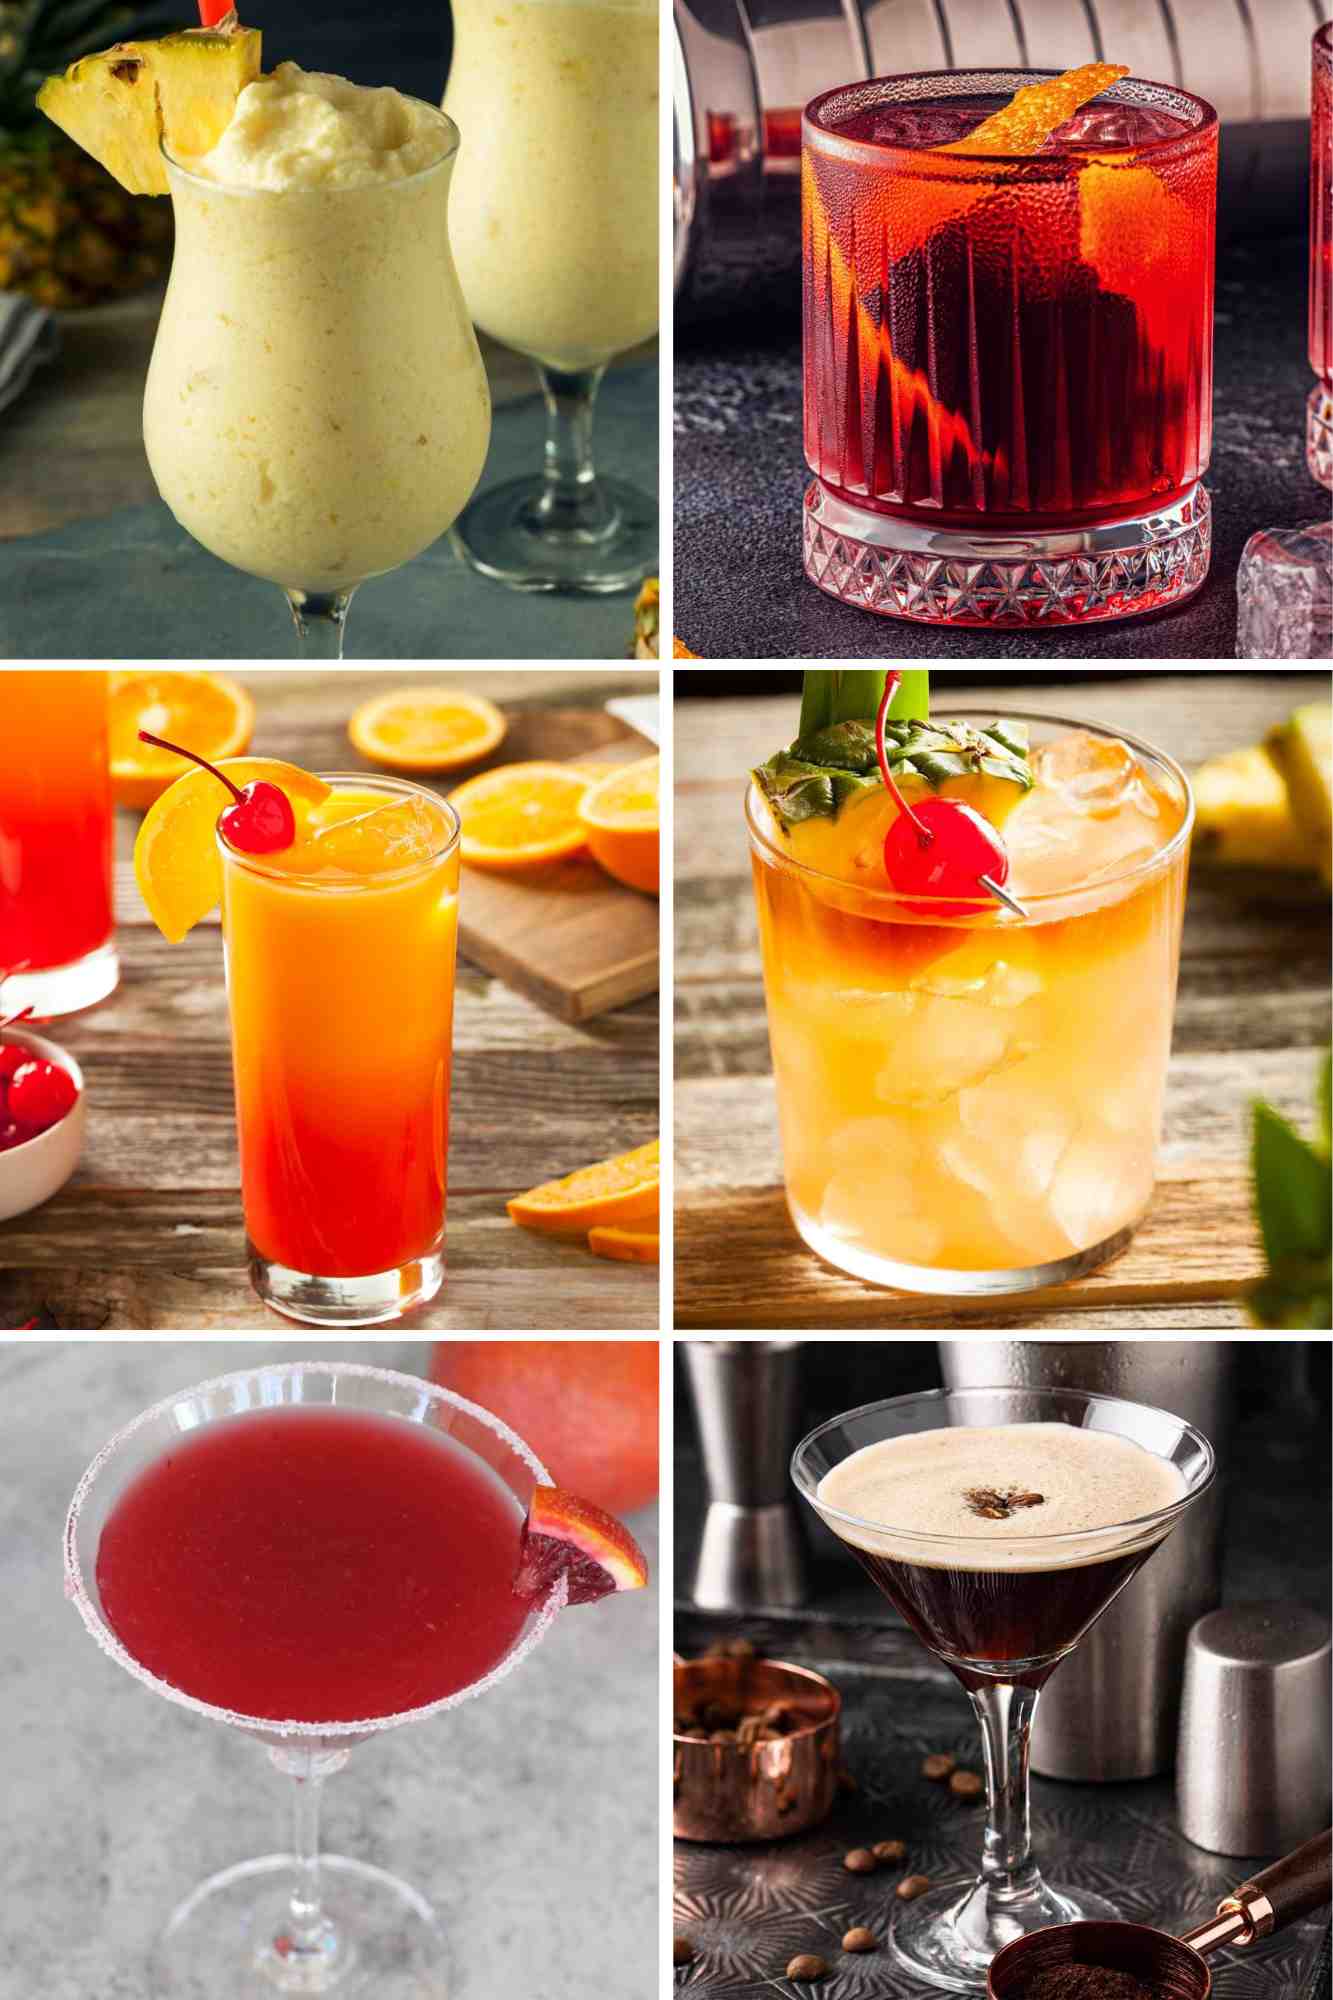 If you’re looking for a new signature drink or you’re new to the world of mixed drinks, this list of 40 Great Cocktails has everything you need! If you are planning for a night out, you’ll know exactly what to order at restaurants. Looking to recreate these classic cocktails at home? They’re quick and easy to make – from margaritas to mojitos and everything in between.